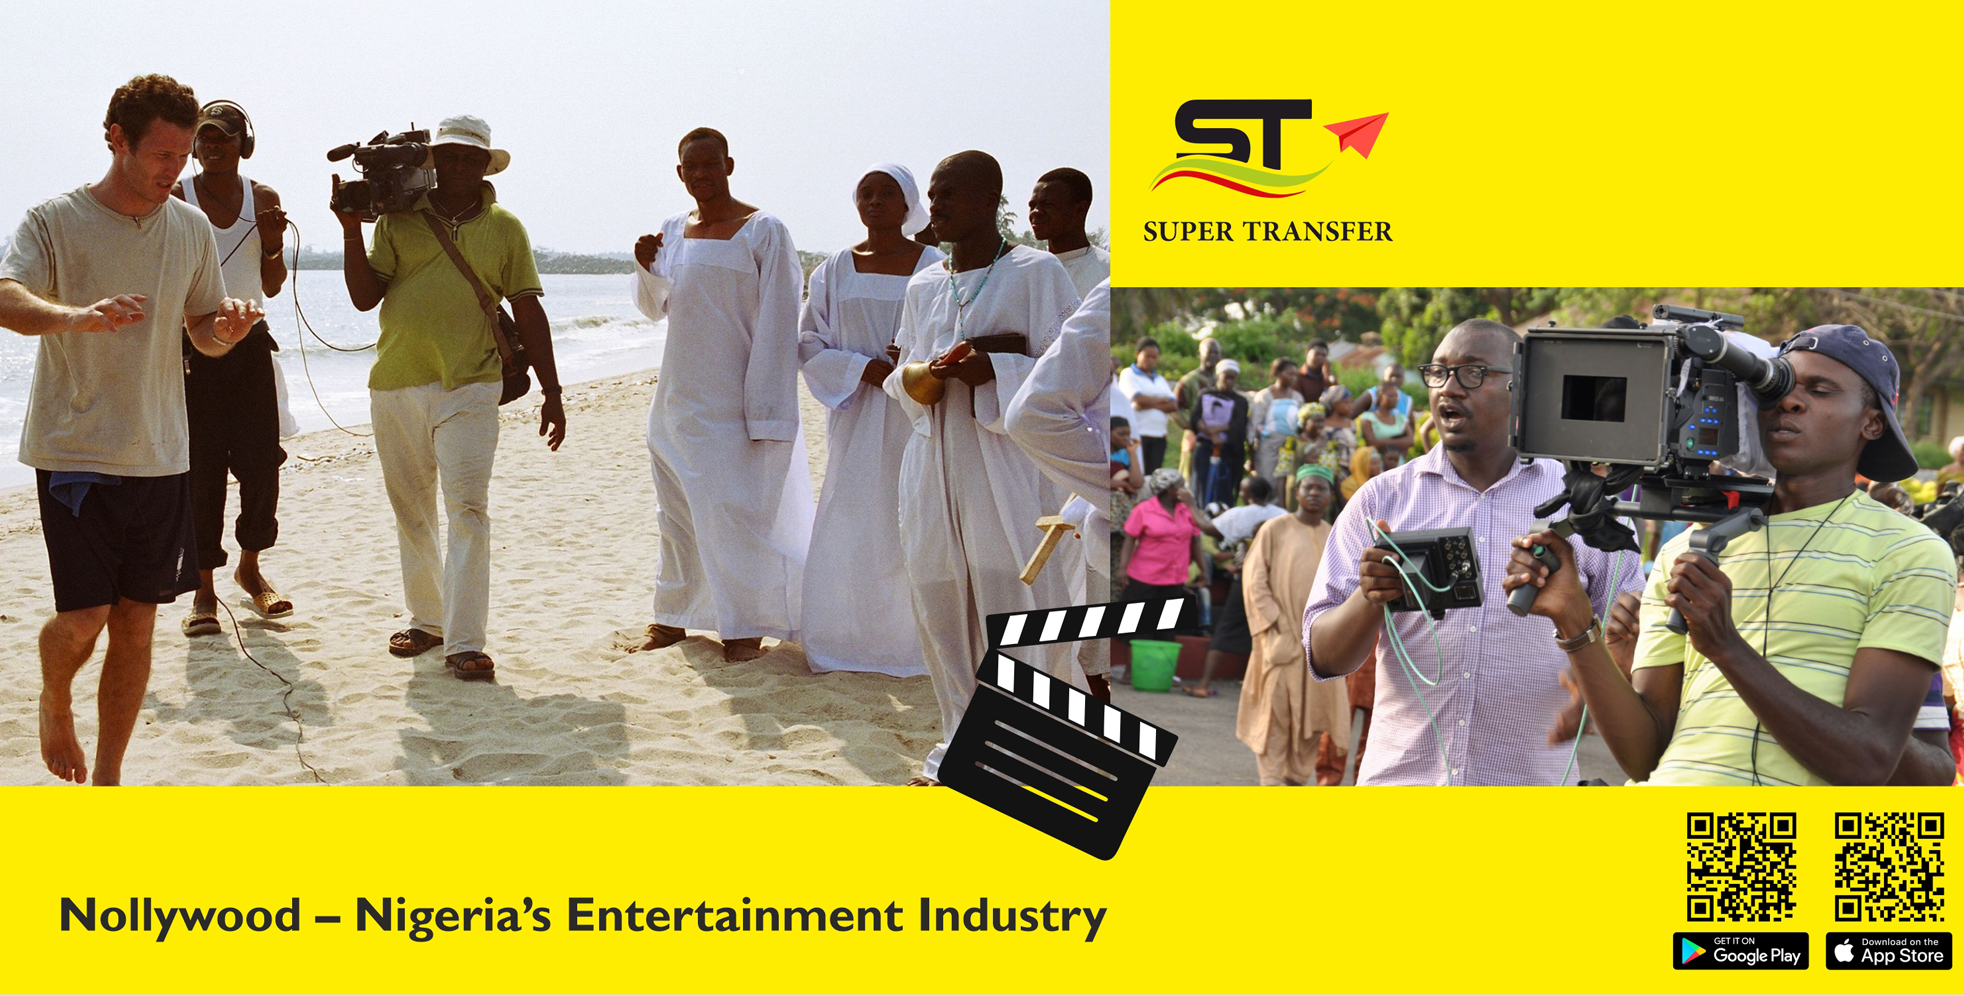 Nollywood - Nigeria's Entertainment Industry